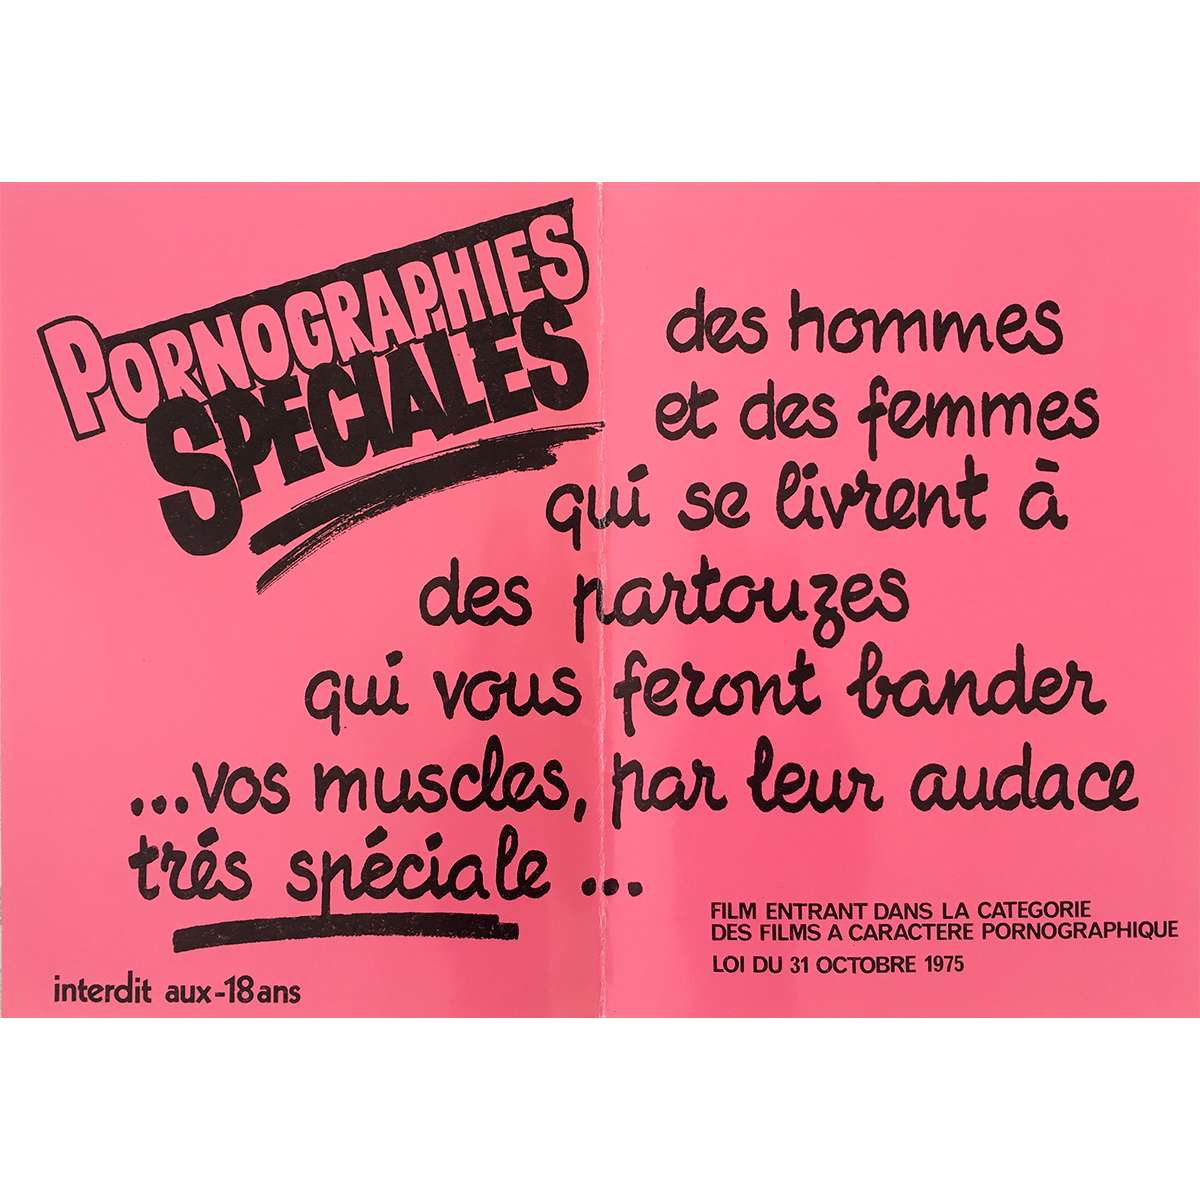 PORNOGRAPHIES SPECIALES French Movie Poster - 12x15 in. - 1970'S Rose